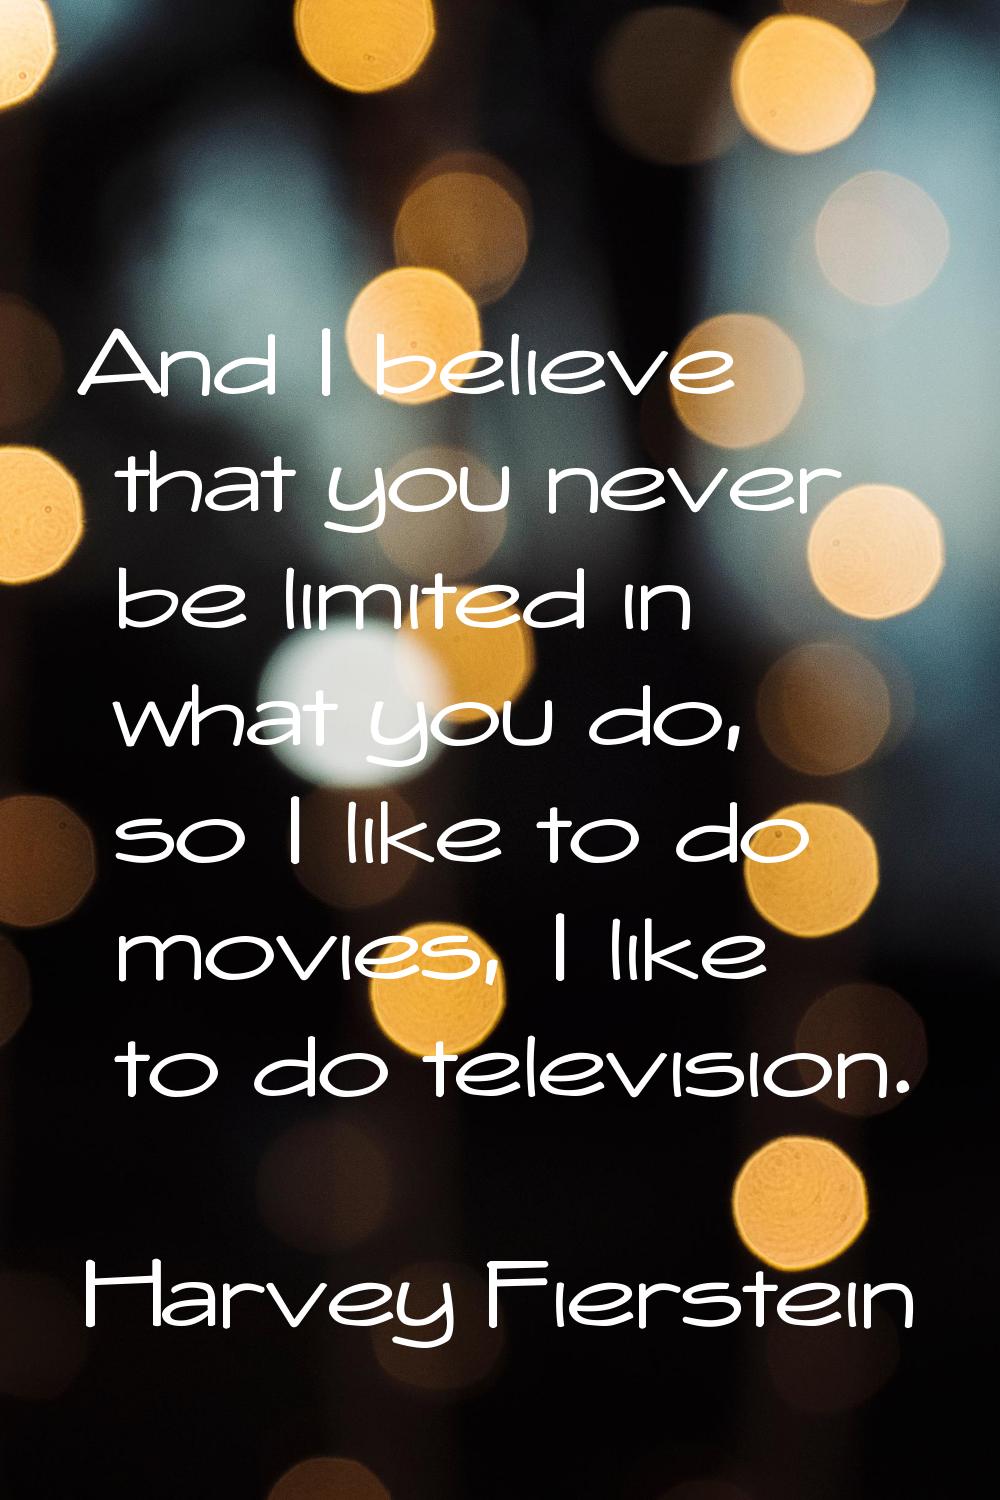 And I believe that you never be limited in what you do, so I like to do movies, I like to do televi